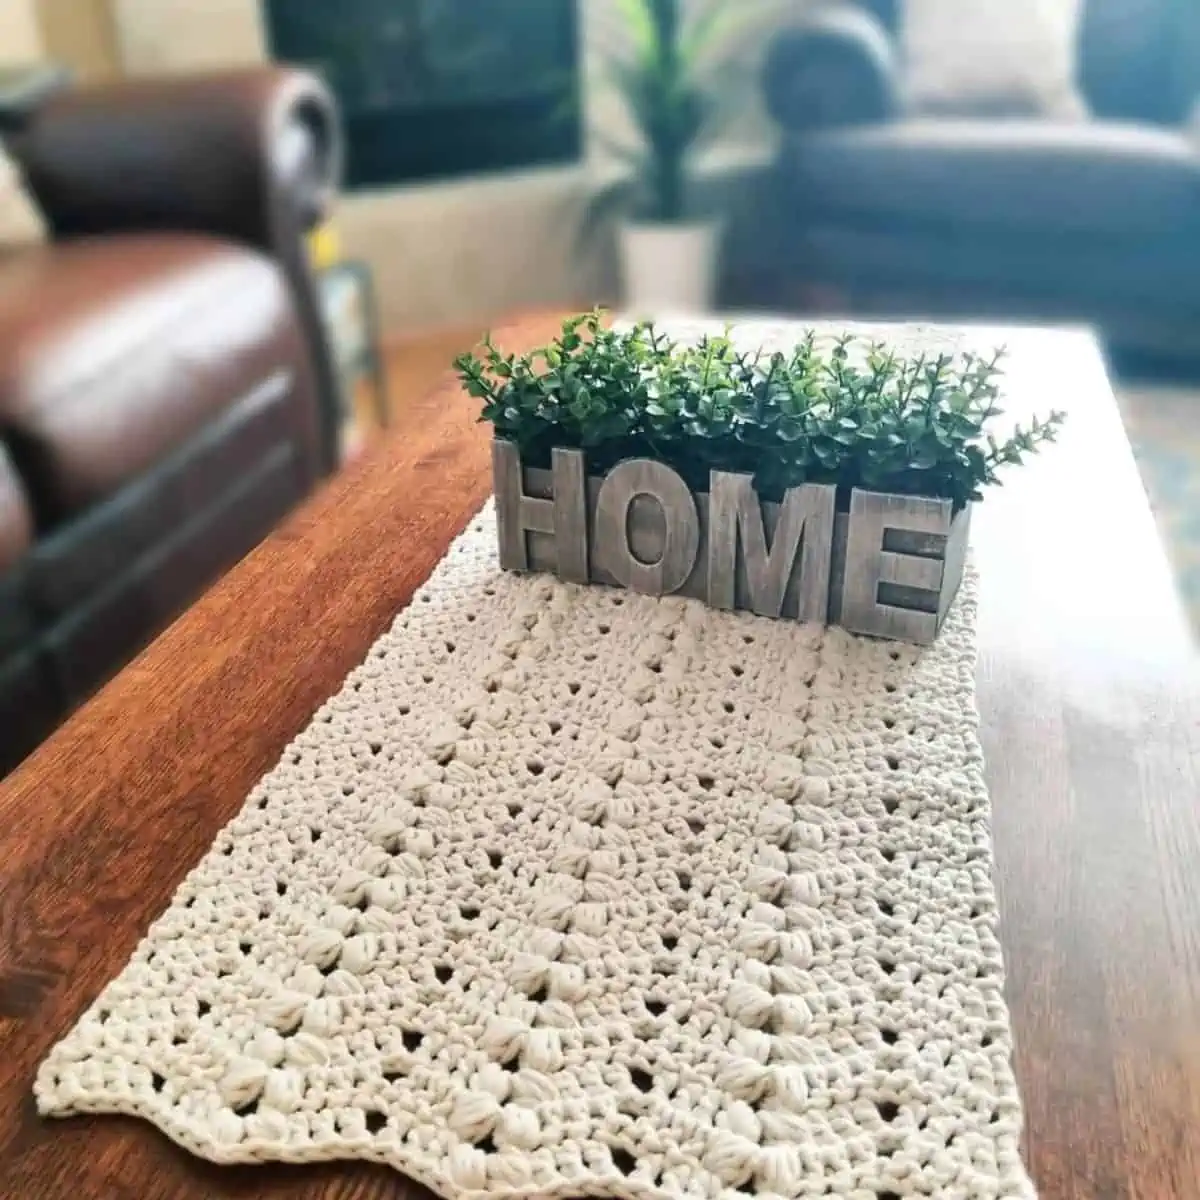 table with a crochet runner and a small grassy vase